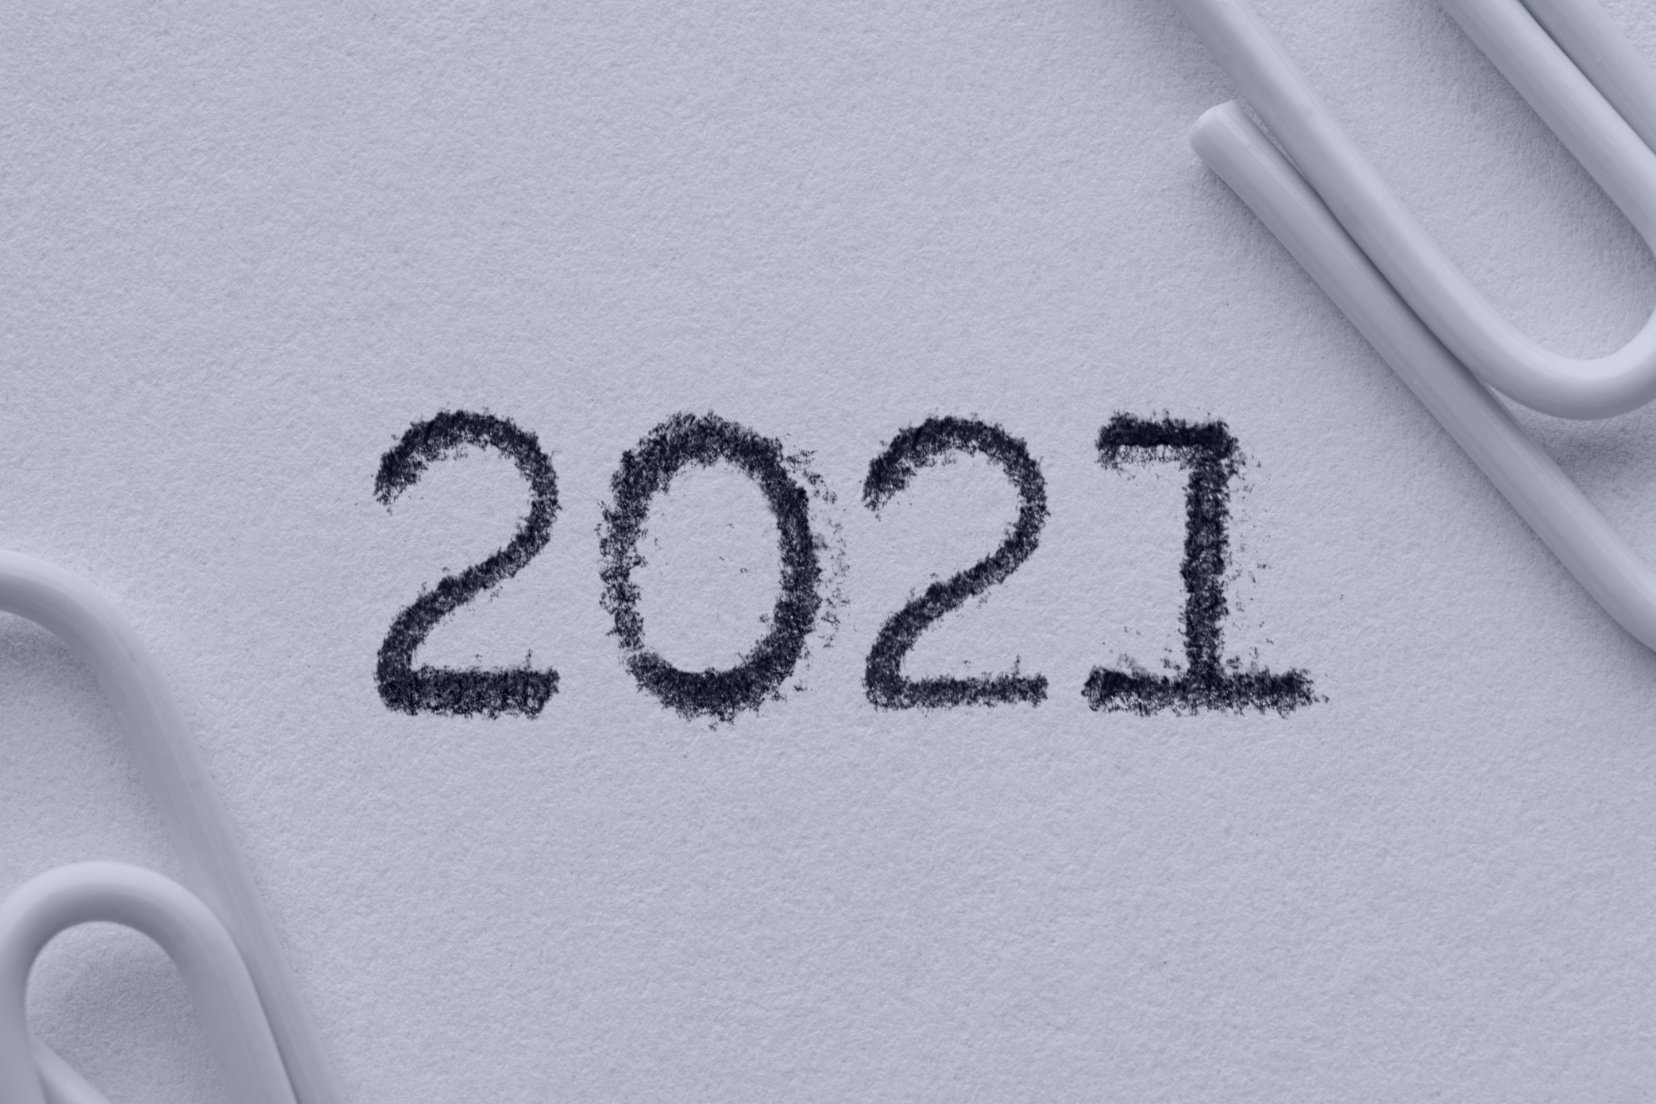 2021 Predictions for Manufacturing